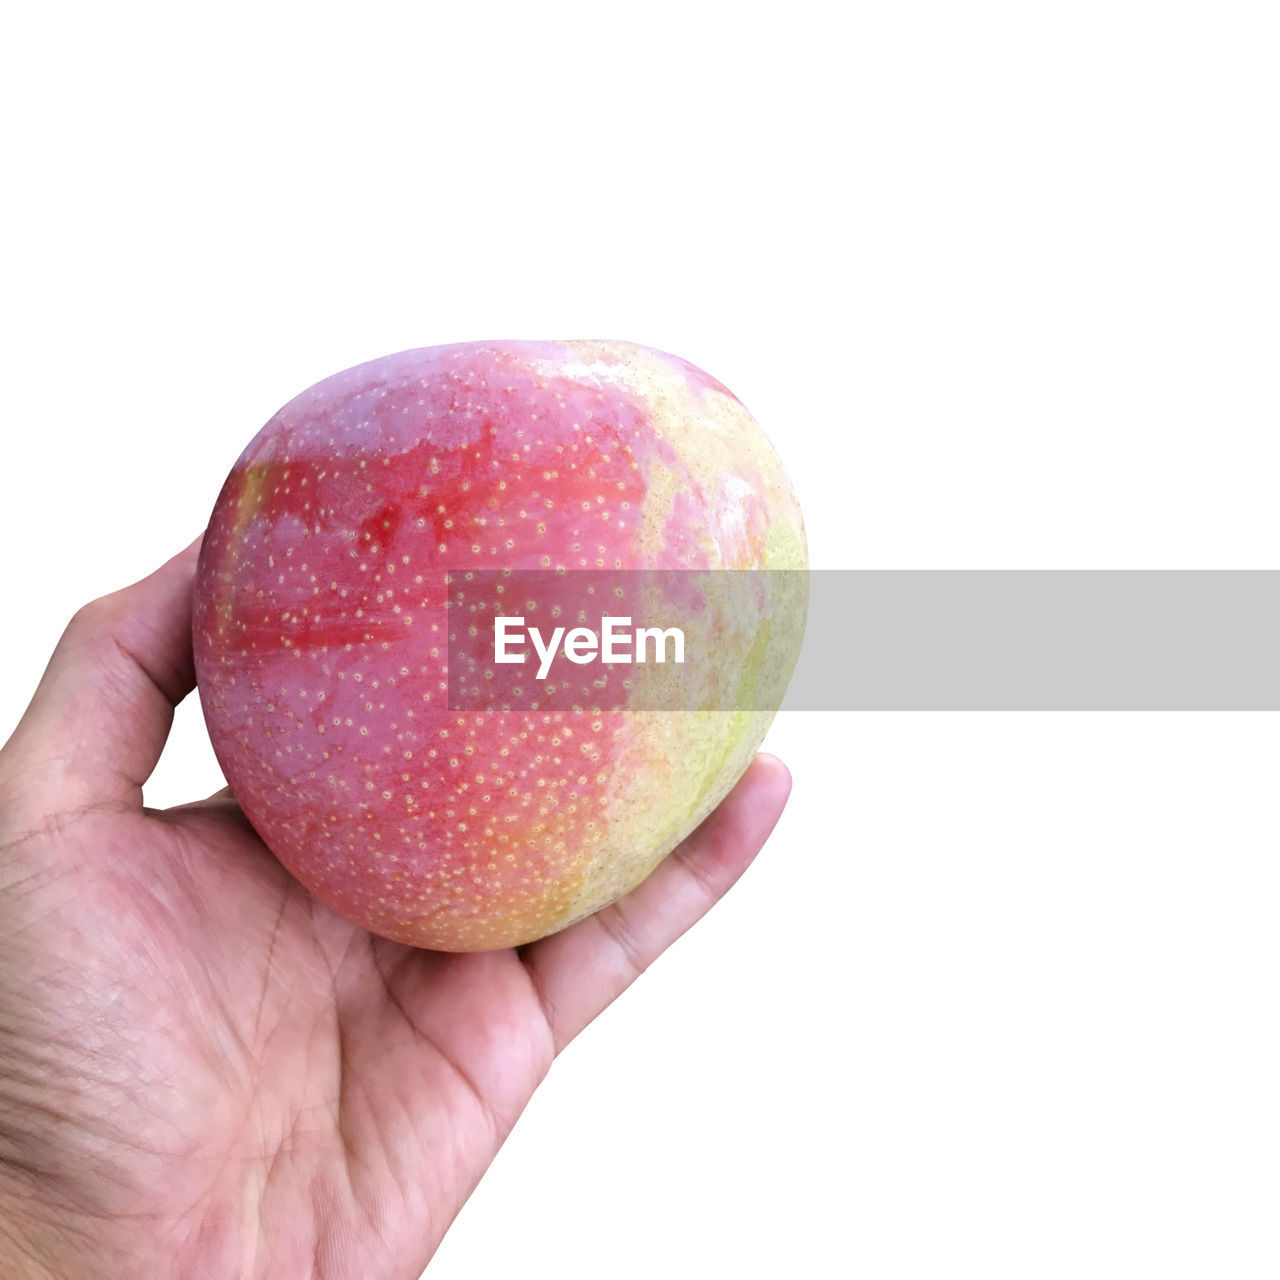 CLOSE-UP OF PERSON HOLDING APPLE